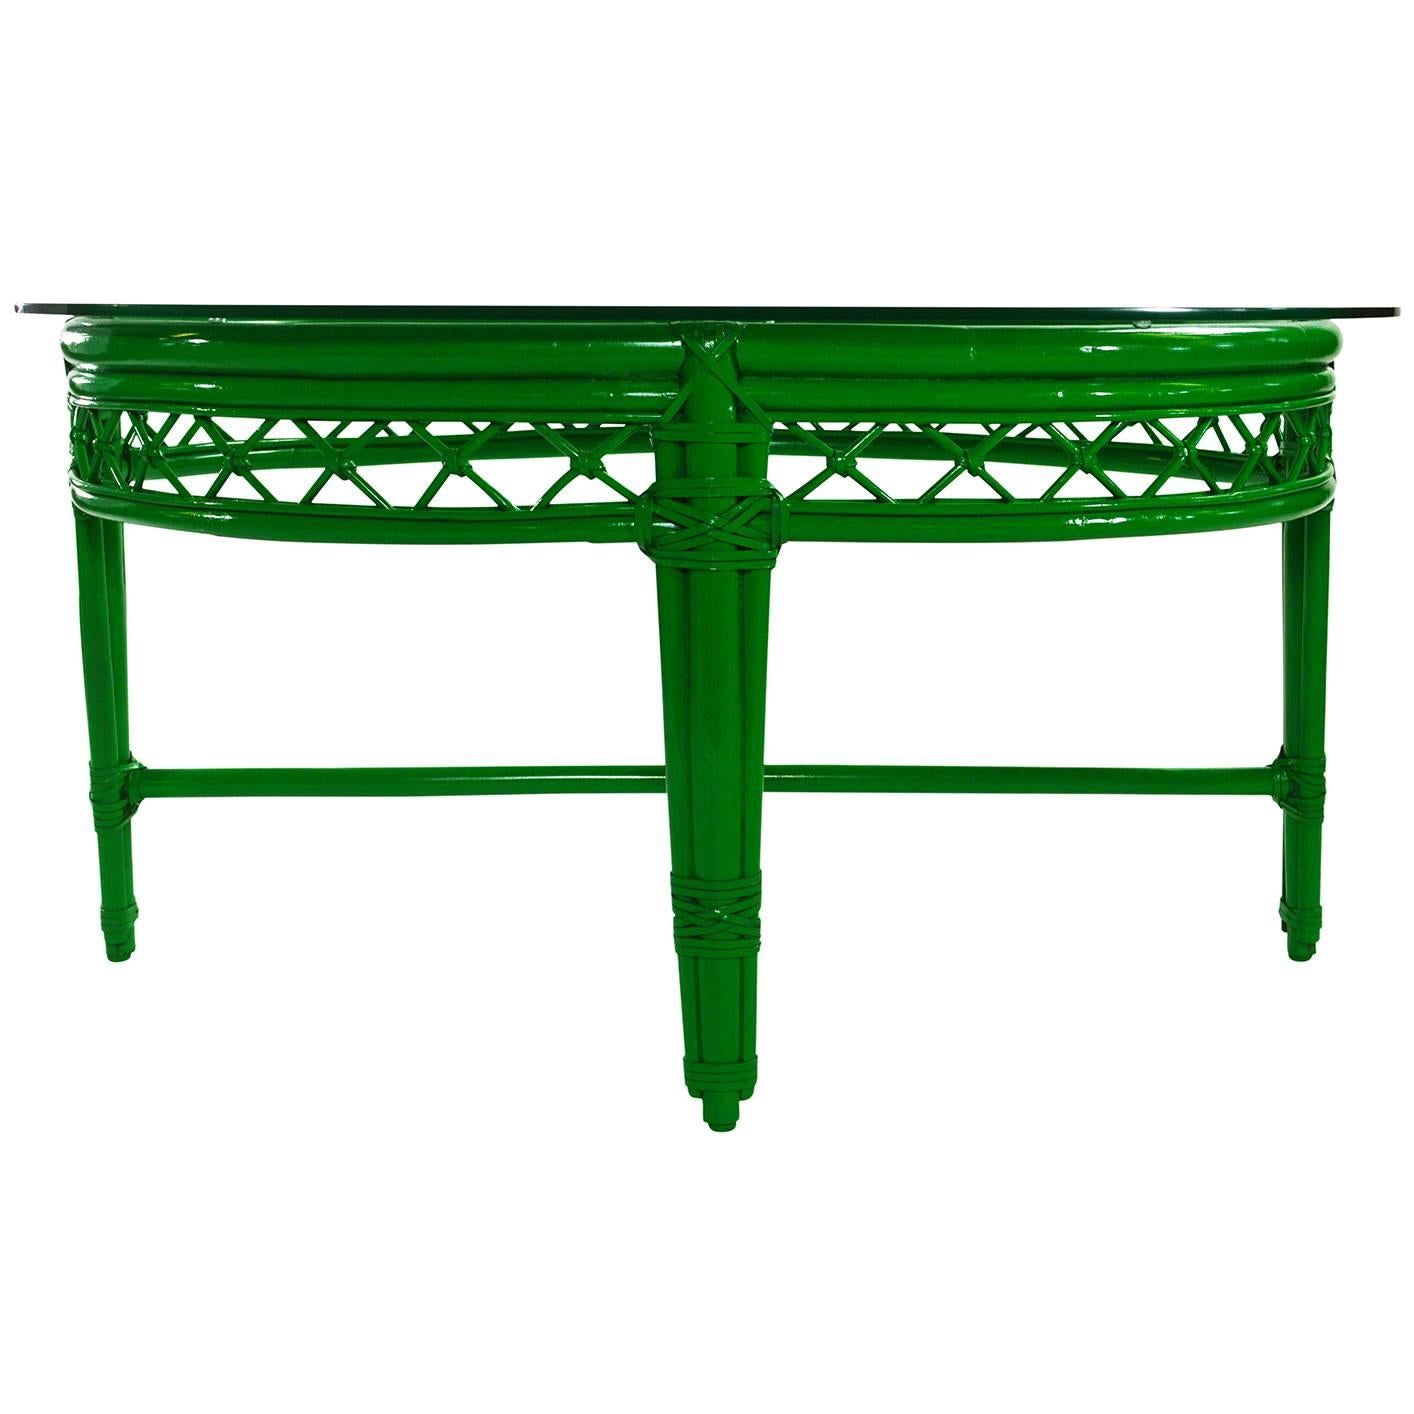 Ficks Reed cocktail or coffee table newly lacquered in green with new customer glass top. The table has a rattan frame and lattice apron with leather windings.